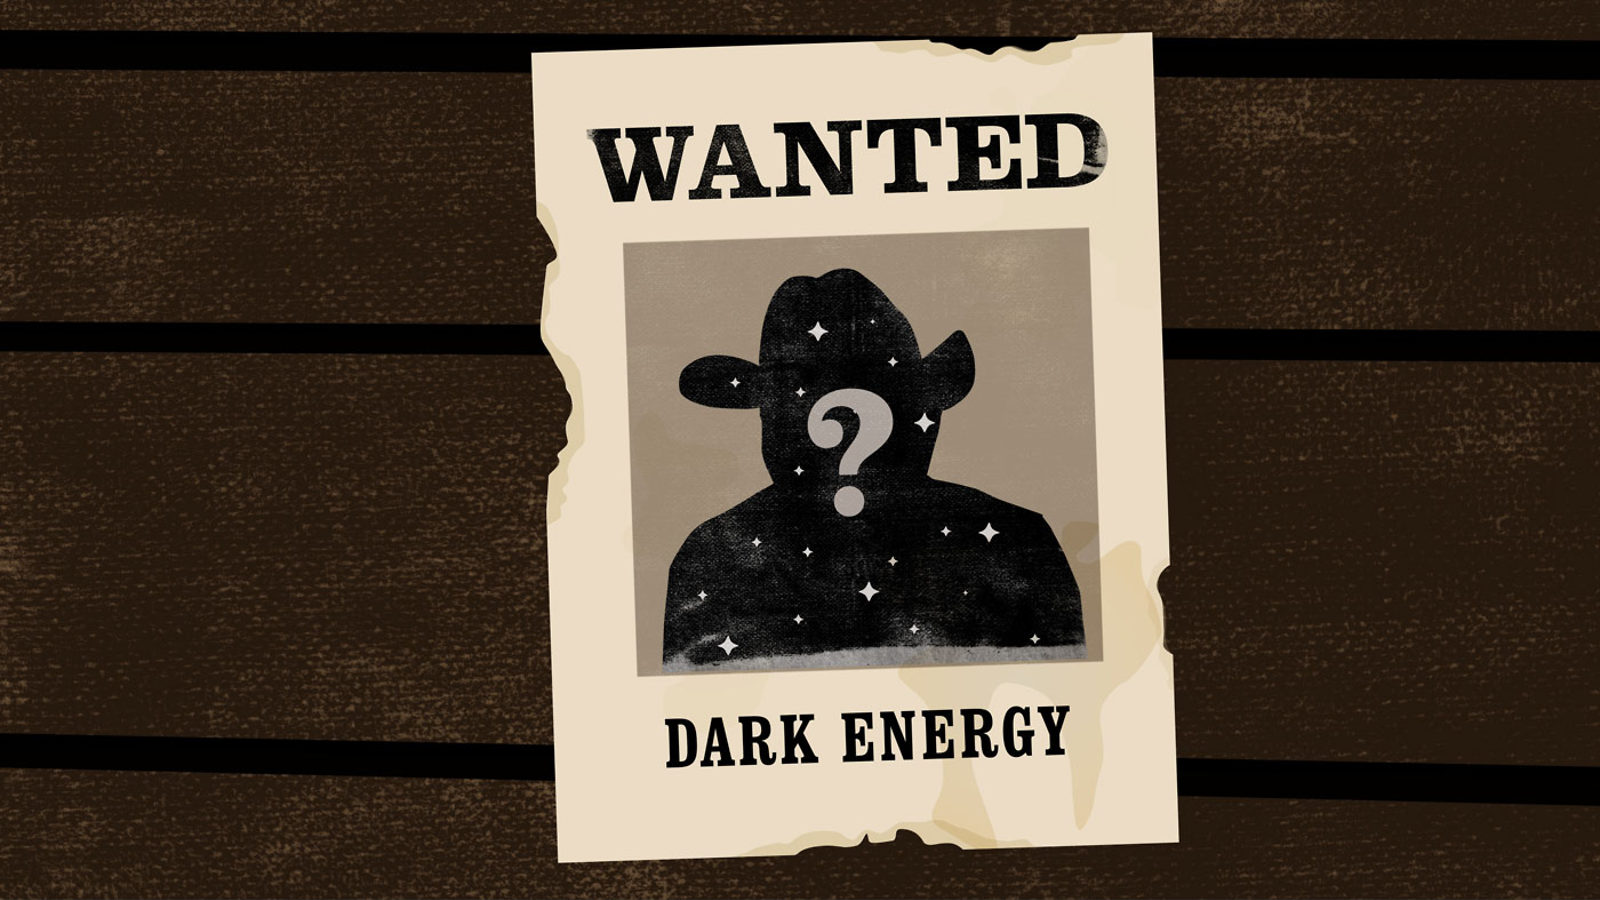 Dark energy "Wanted" poster